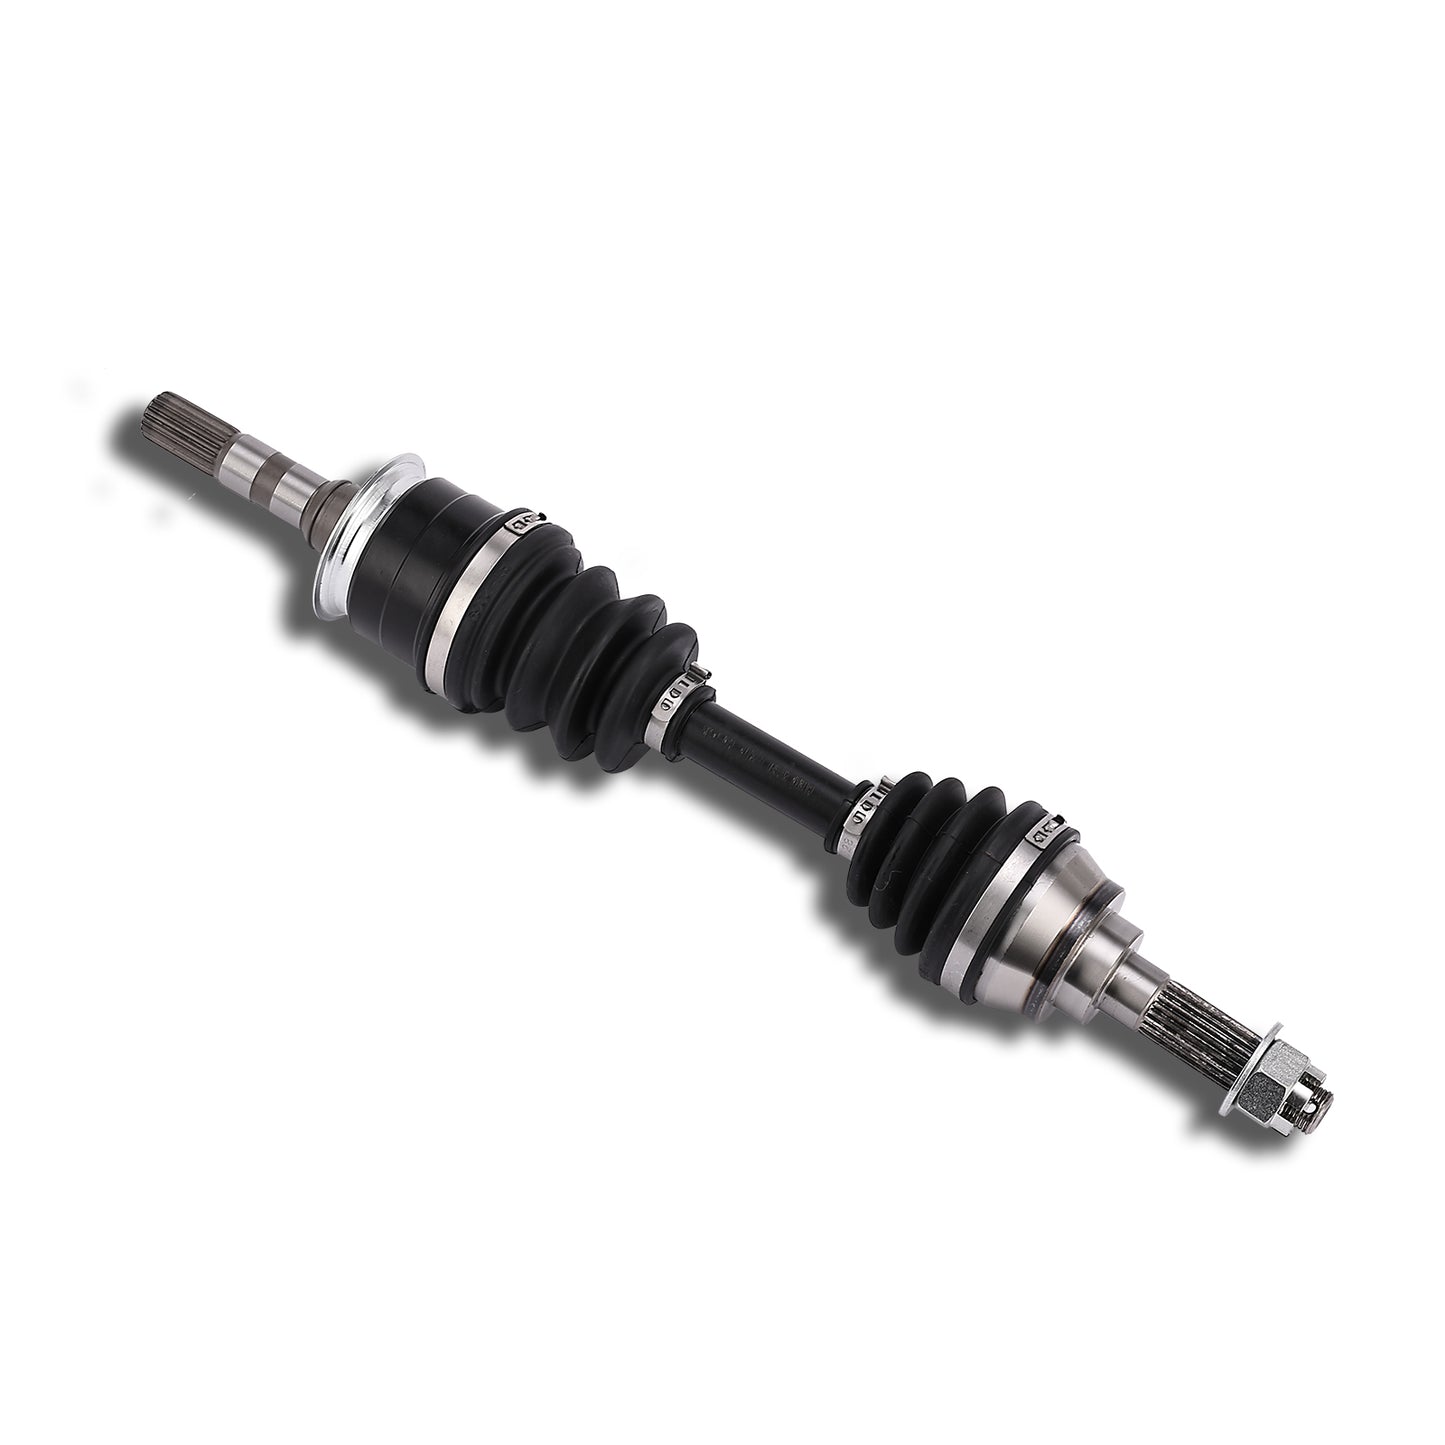 CAM-KW308 Front Left Drive Shaft CV Axle for KAWASAKI (1989-2005) Bayou 300 BF / (1993-1999) Bayou 400 BFKAWASAKI (1989-2005) Bayou 300 BF / (1993-1999) Bayou 400 BF